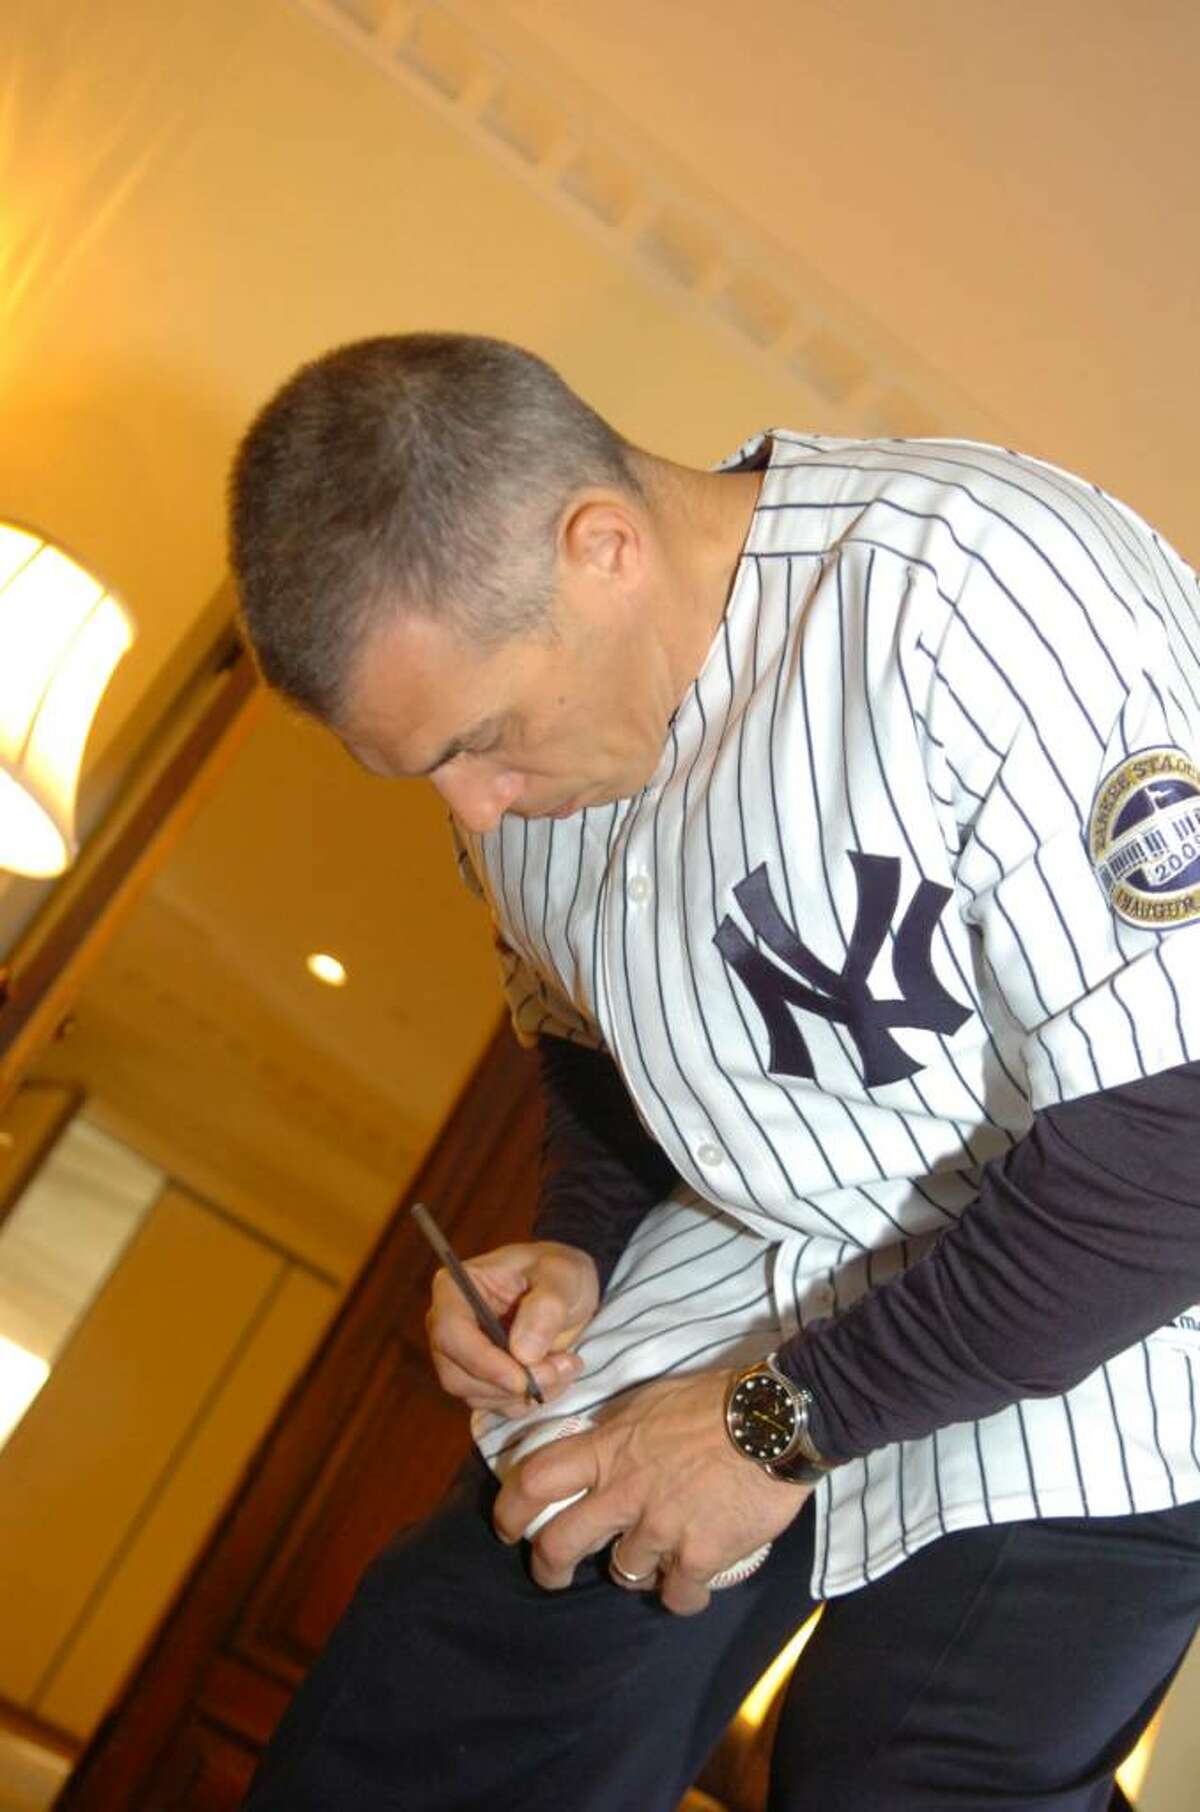 New York Yankees manager Joe Girardi autographs baseballs at the Convent of the Sacred Heart's celebration of the Yankees 2009 World Series championship on January 26, 2010.